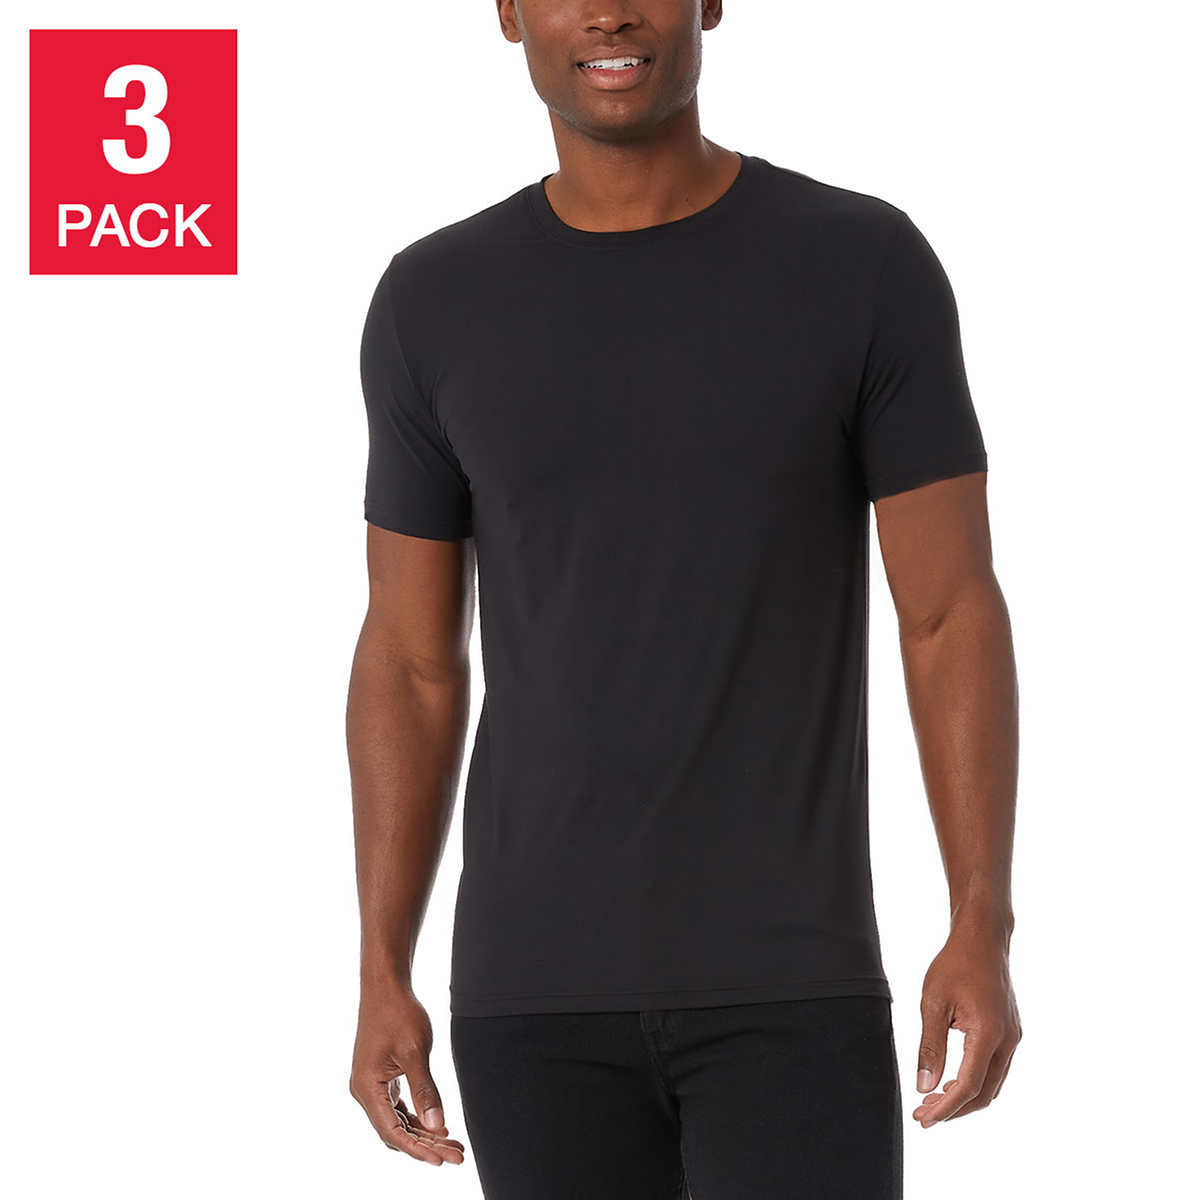  3 Pack Men's Plain Black T Shirts Pro 5 Athletic Blank Tees :  Clothing, Shoes & Jewelry